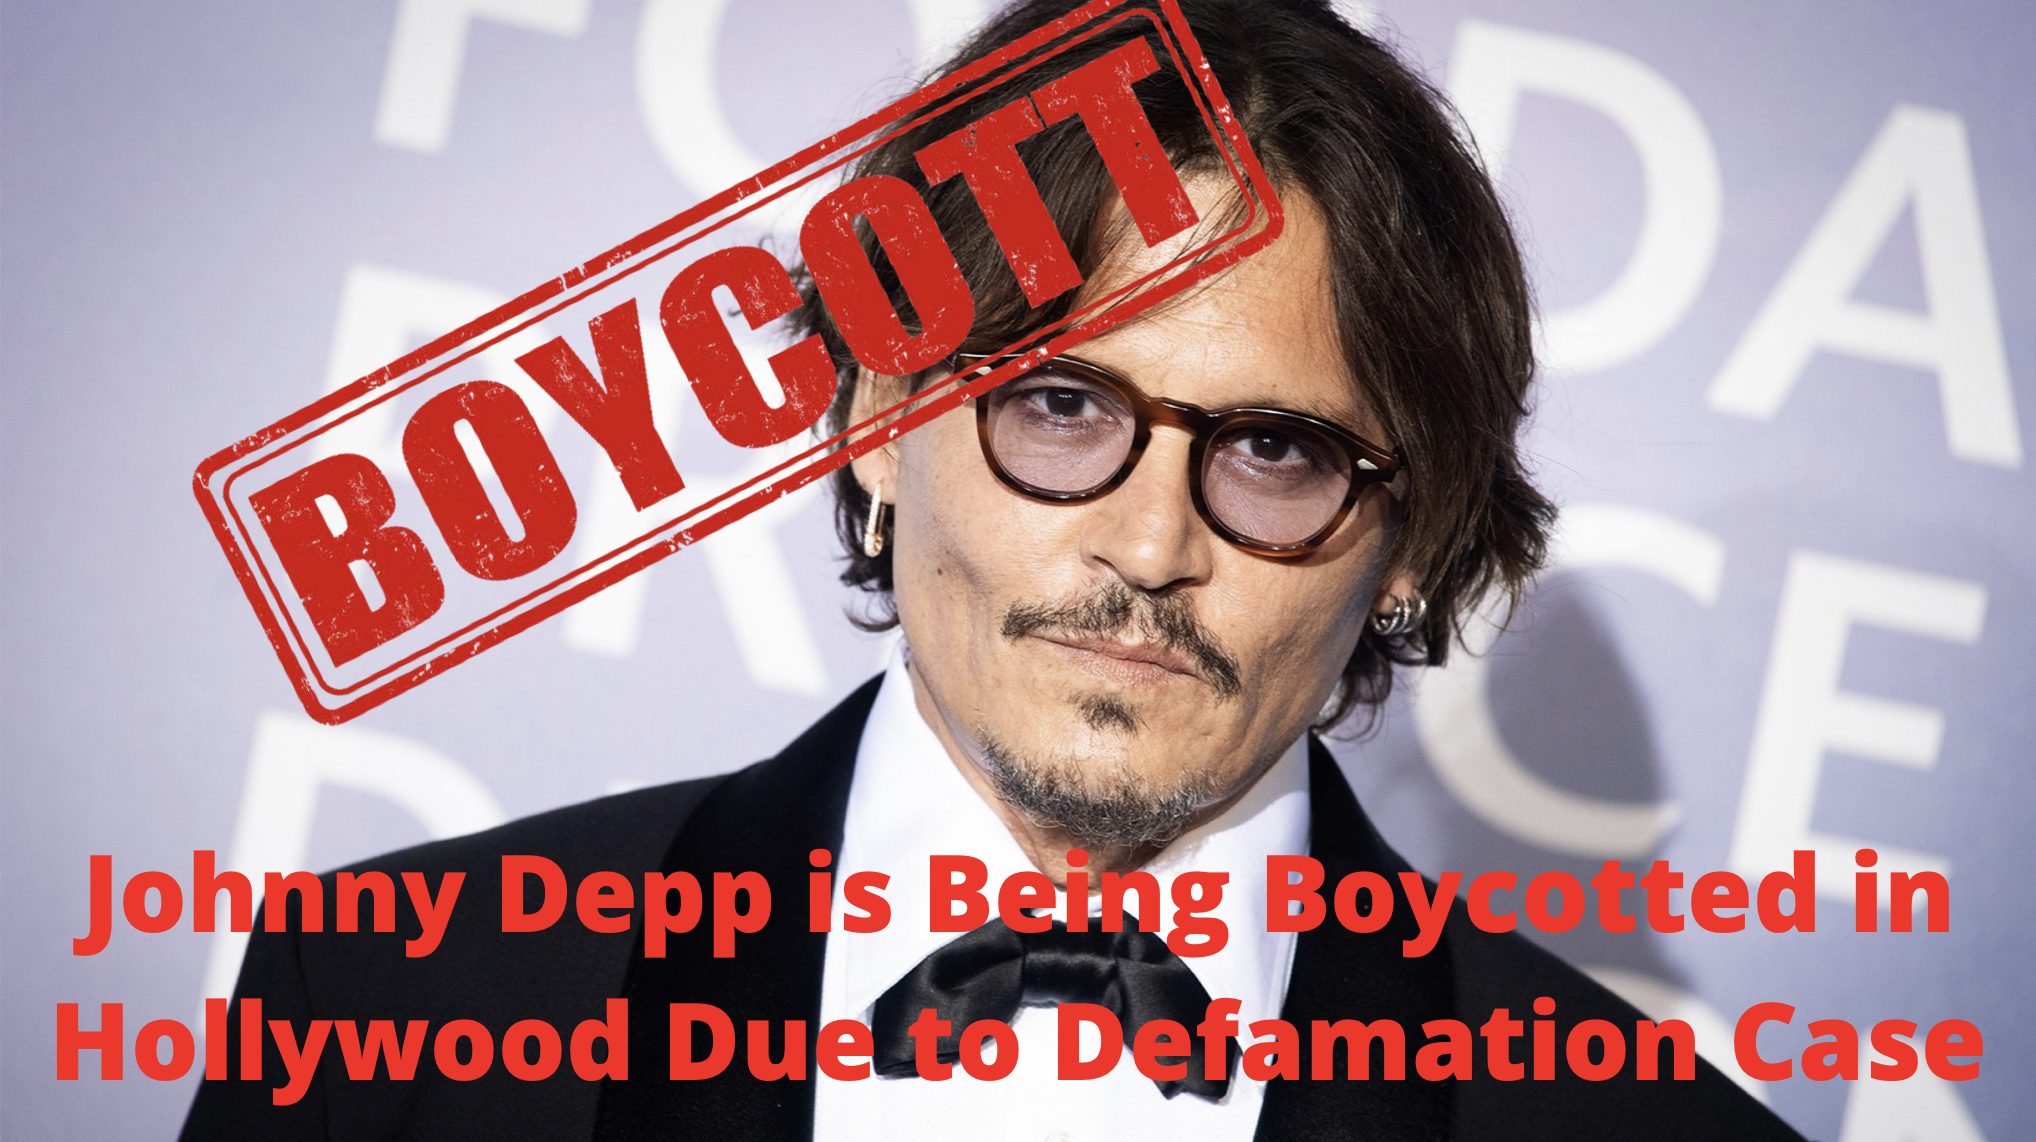 Johnny Depp is Being Boycotted in Hollywood Due to Defamation Case